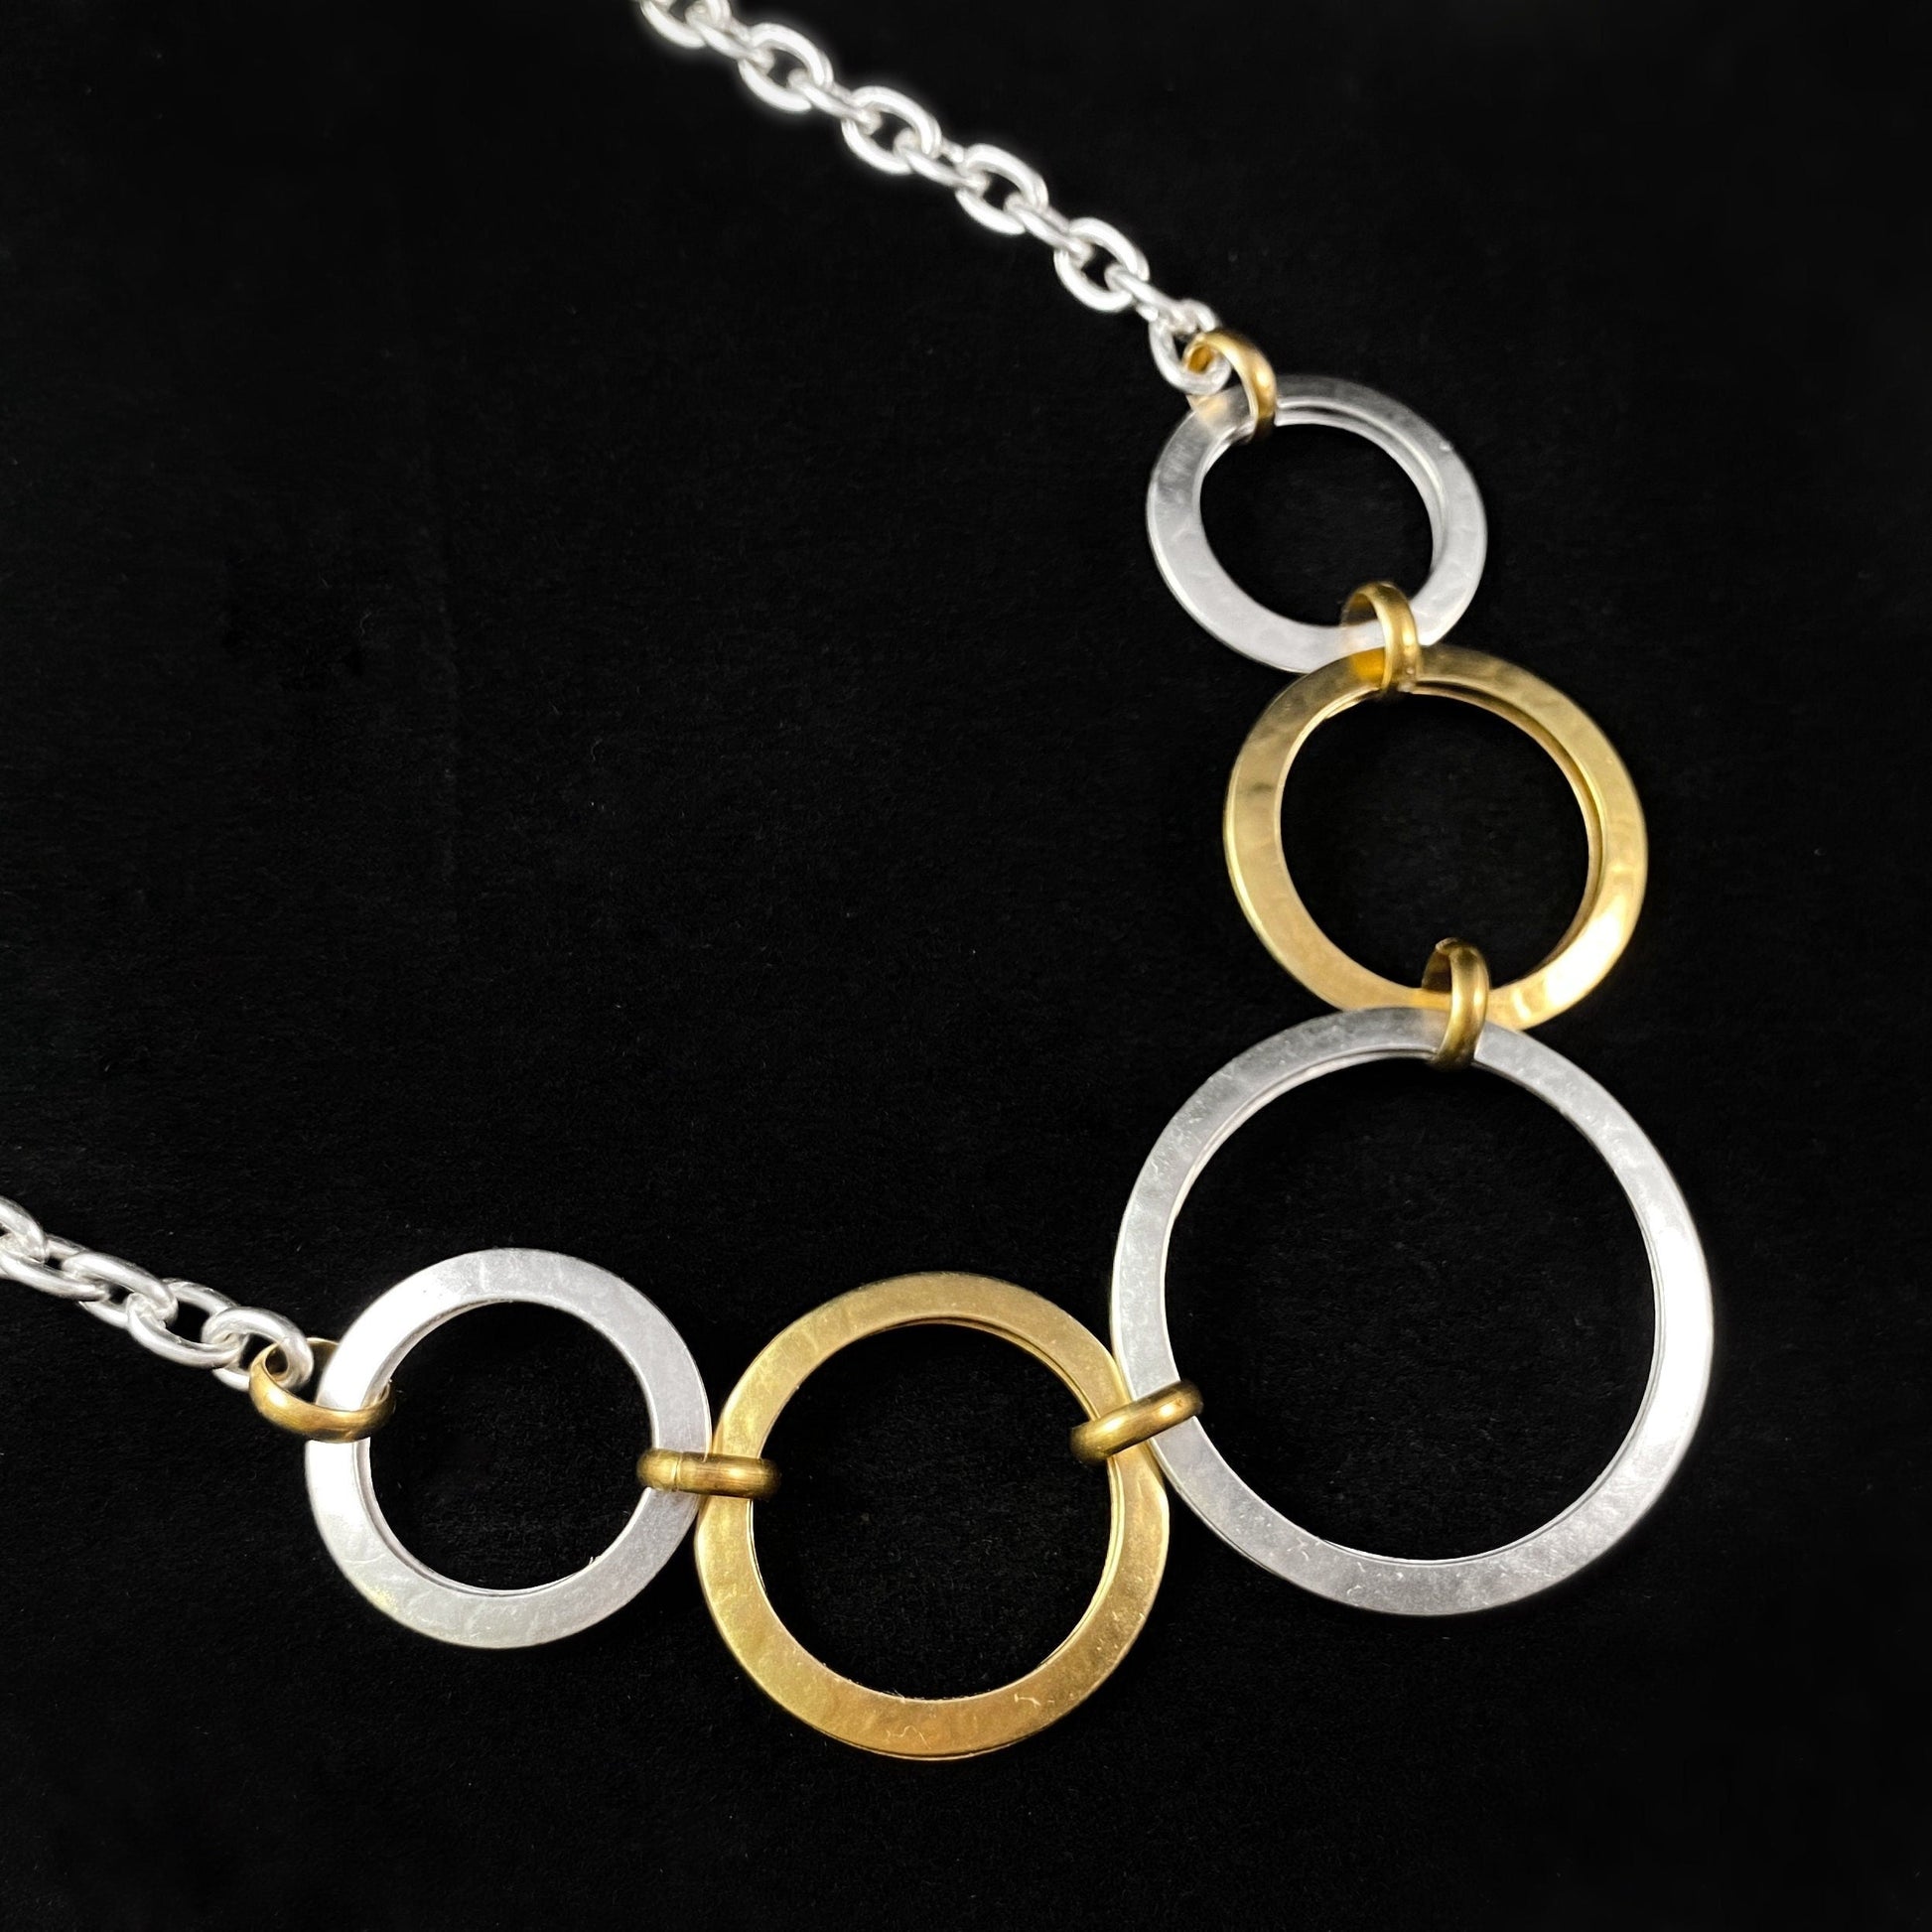 Handmade Gold and Silver Rings Statement Necklace, Made in USA